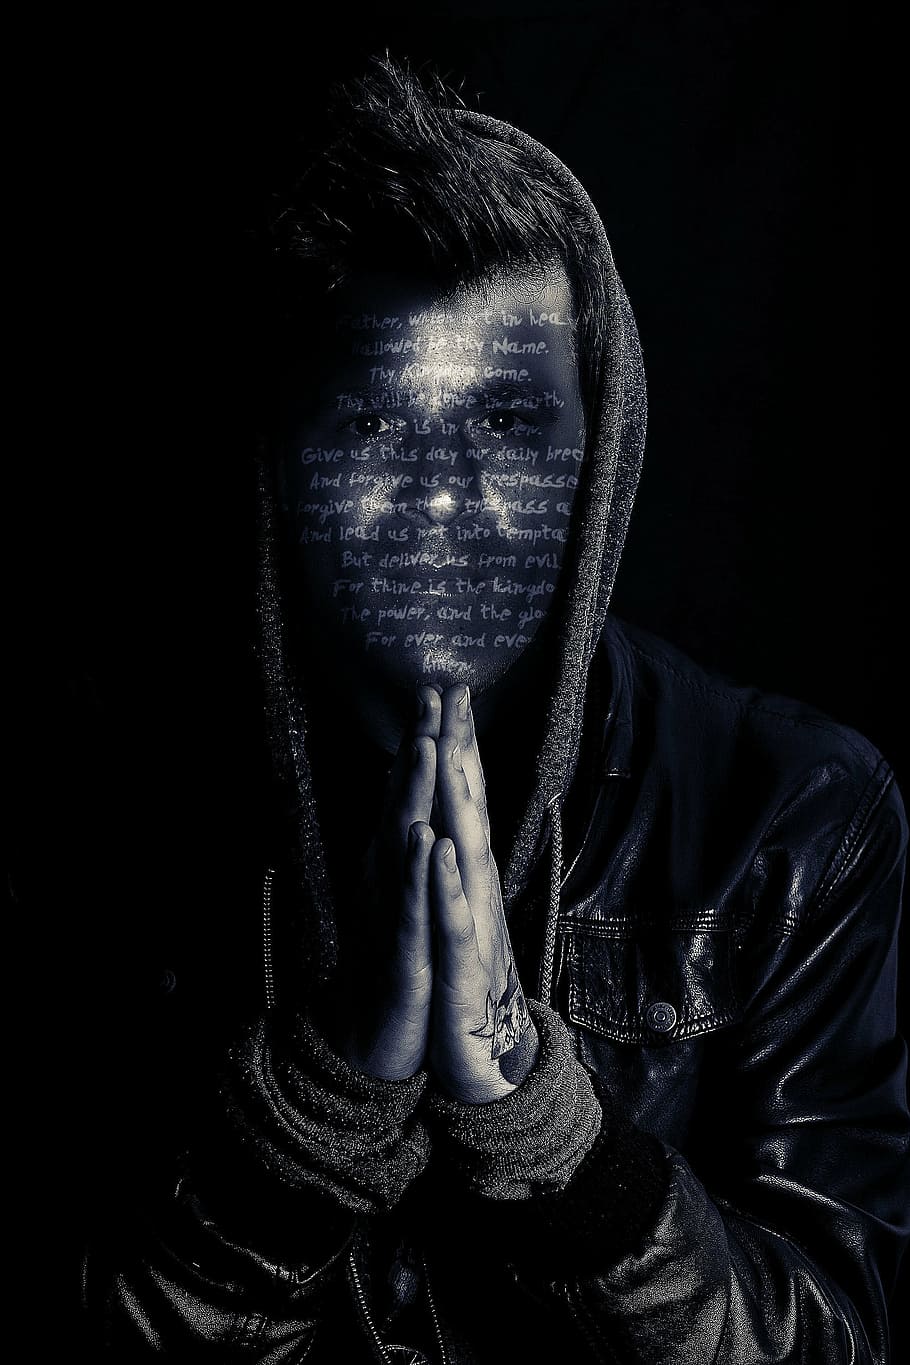 man wearing black hooded jacket with text overlay, pray, prayer